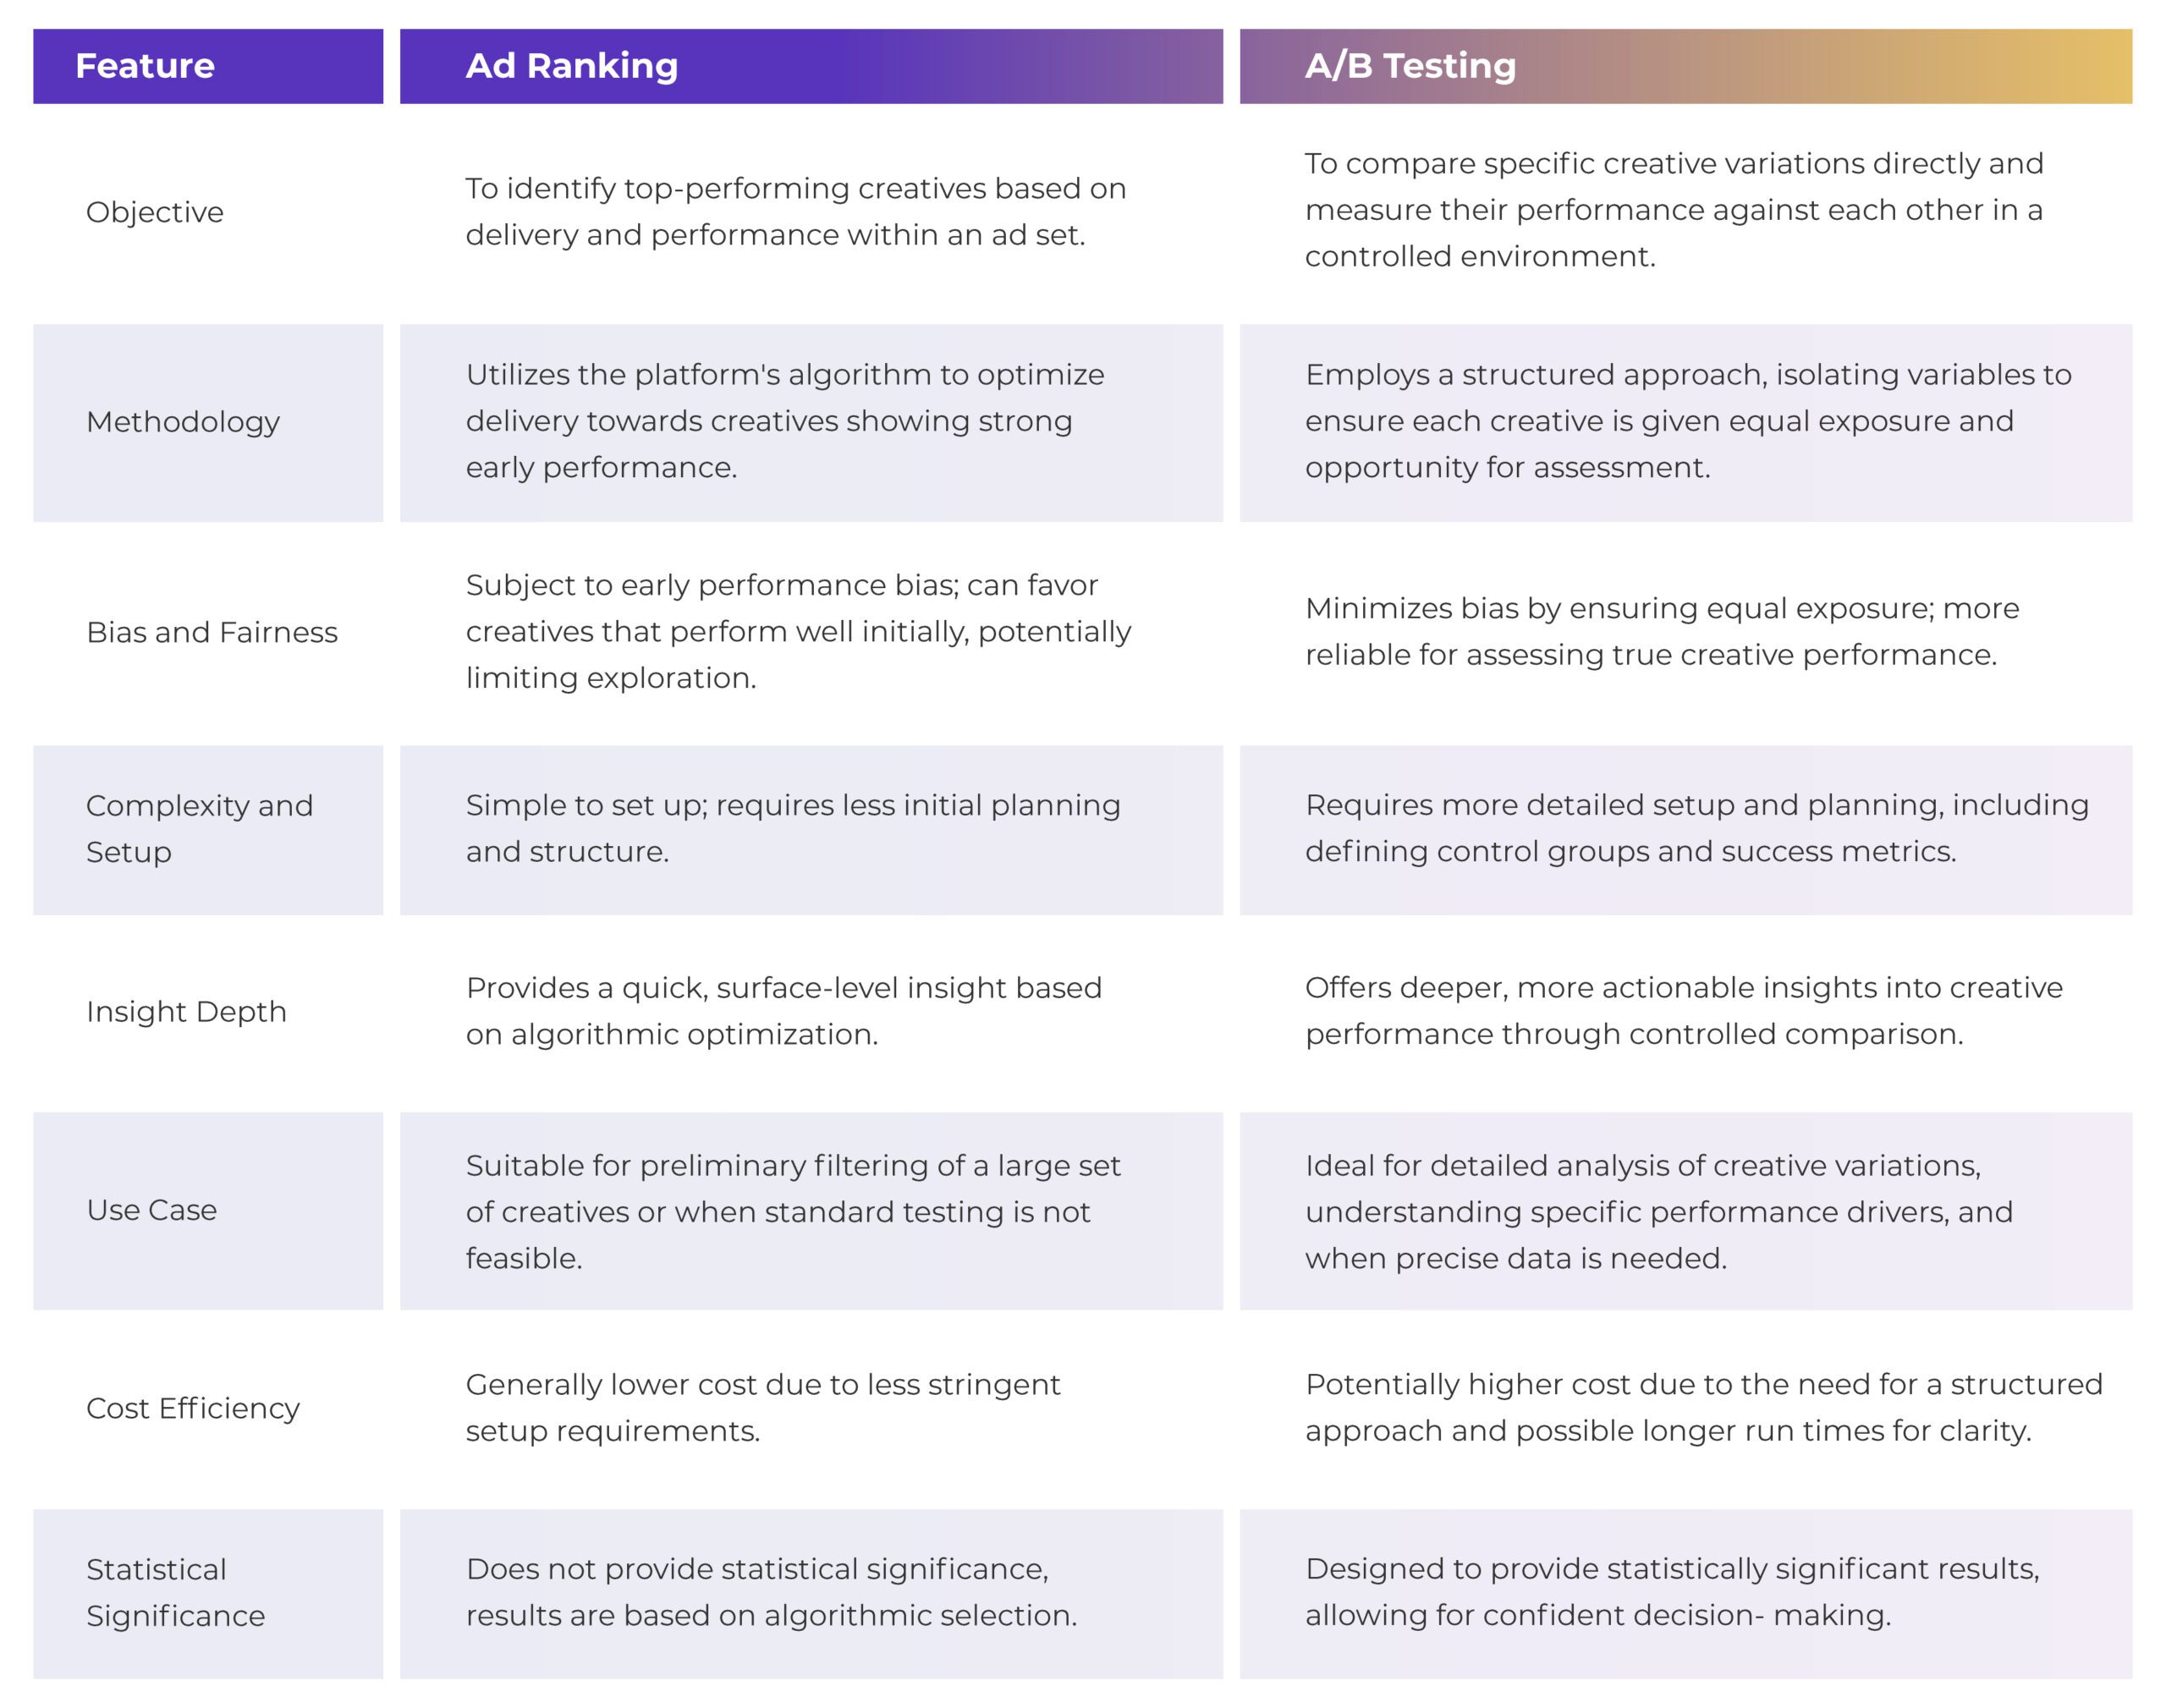 A comparison table featuring two columns: 'Ad Ranking' and 'A/B Testing.' Each column lists characteristics under the following headers: Objective, Methodology, Bias and Fairness, Complexity and Setup, Insight Depth, Use Case, Cost Efficiency, and Statistical Significance. 'Ad Ranking' is described as an approach to identify top-performing creatives with a simple setup, algorithm-based insights, suitable for preliminary filtering, generally cost-efficient but lacking statistical significance. 'A/B Testing' is presented as a method to compare creative variations in a controlled environment, offering detailed insights, more reliable for assessing true performance, ideal for detailed analysis, potentially higher in cost, and designed to provide statistically significant results. 